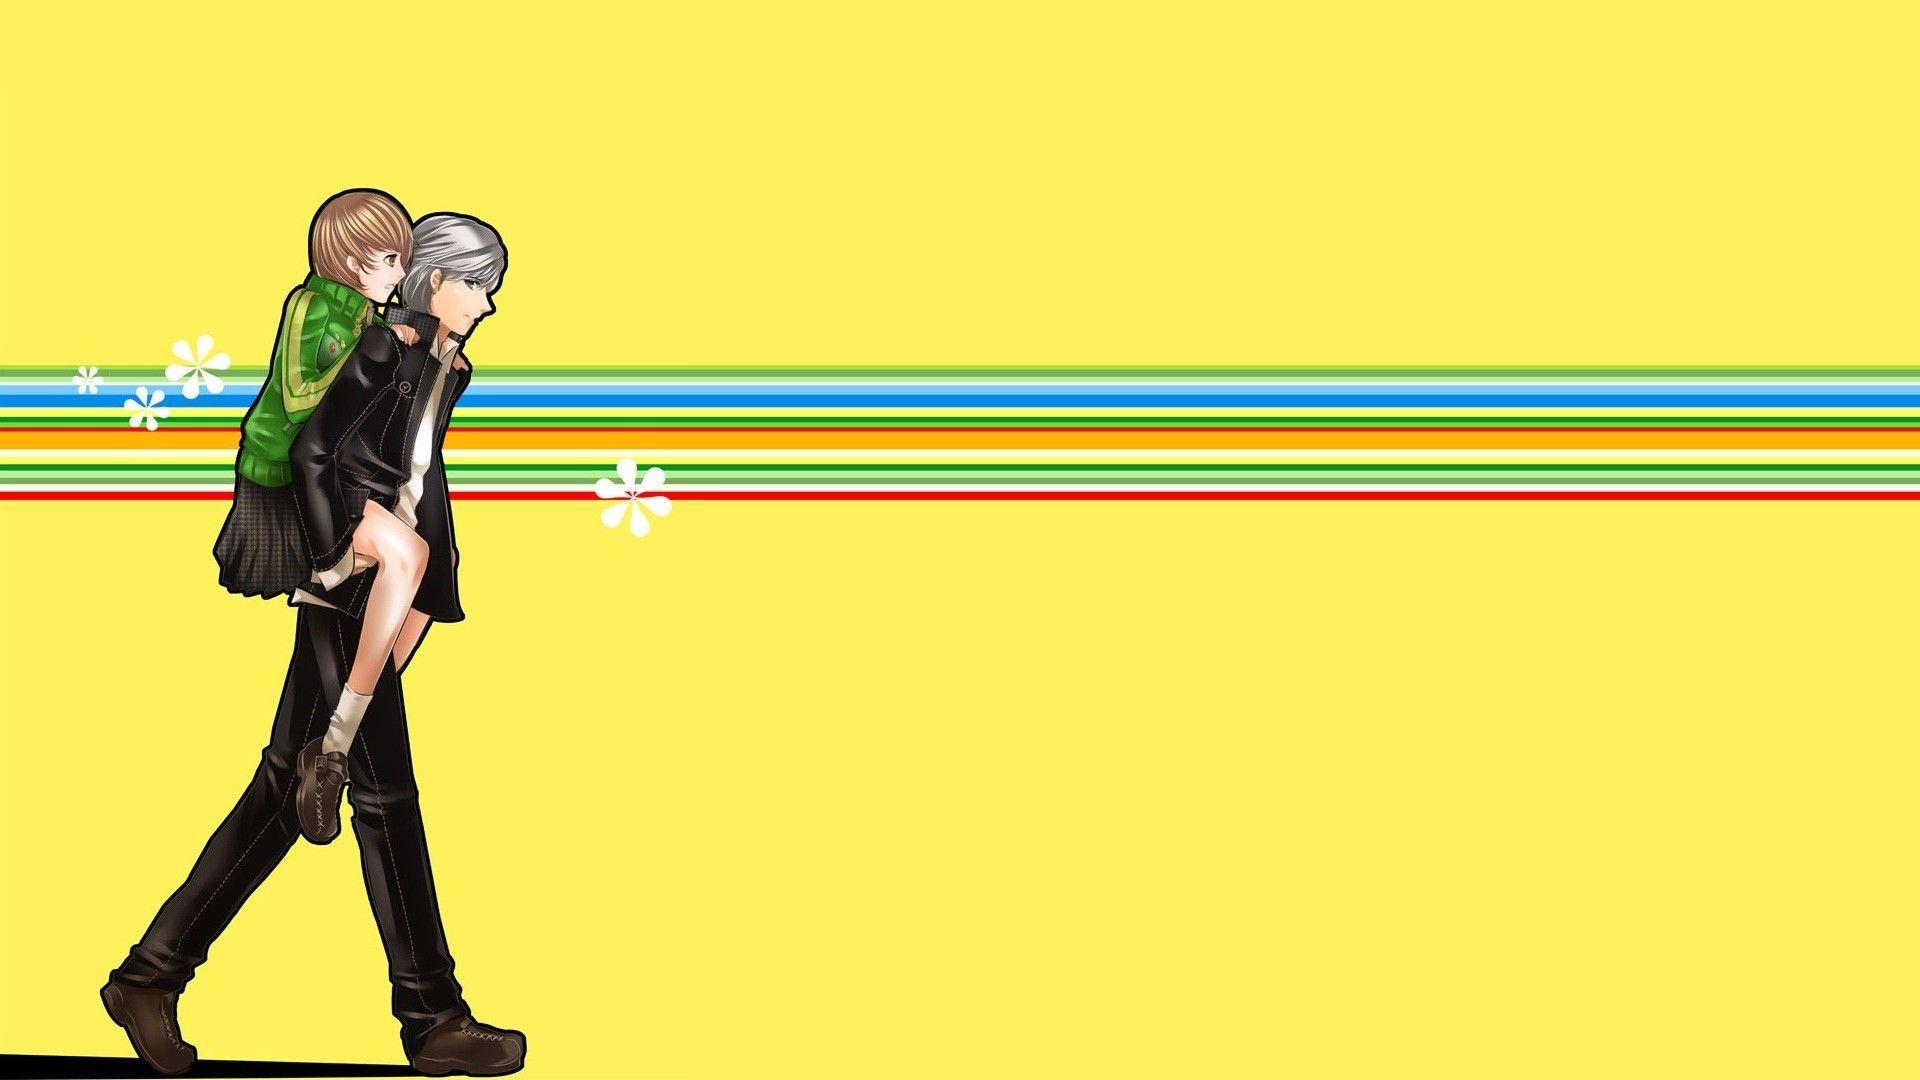 Persona 4 Backgrounds - Wallpaper Cave